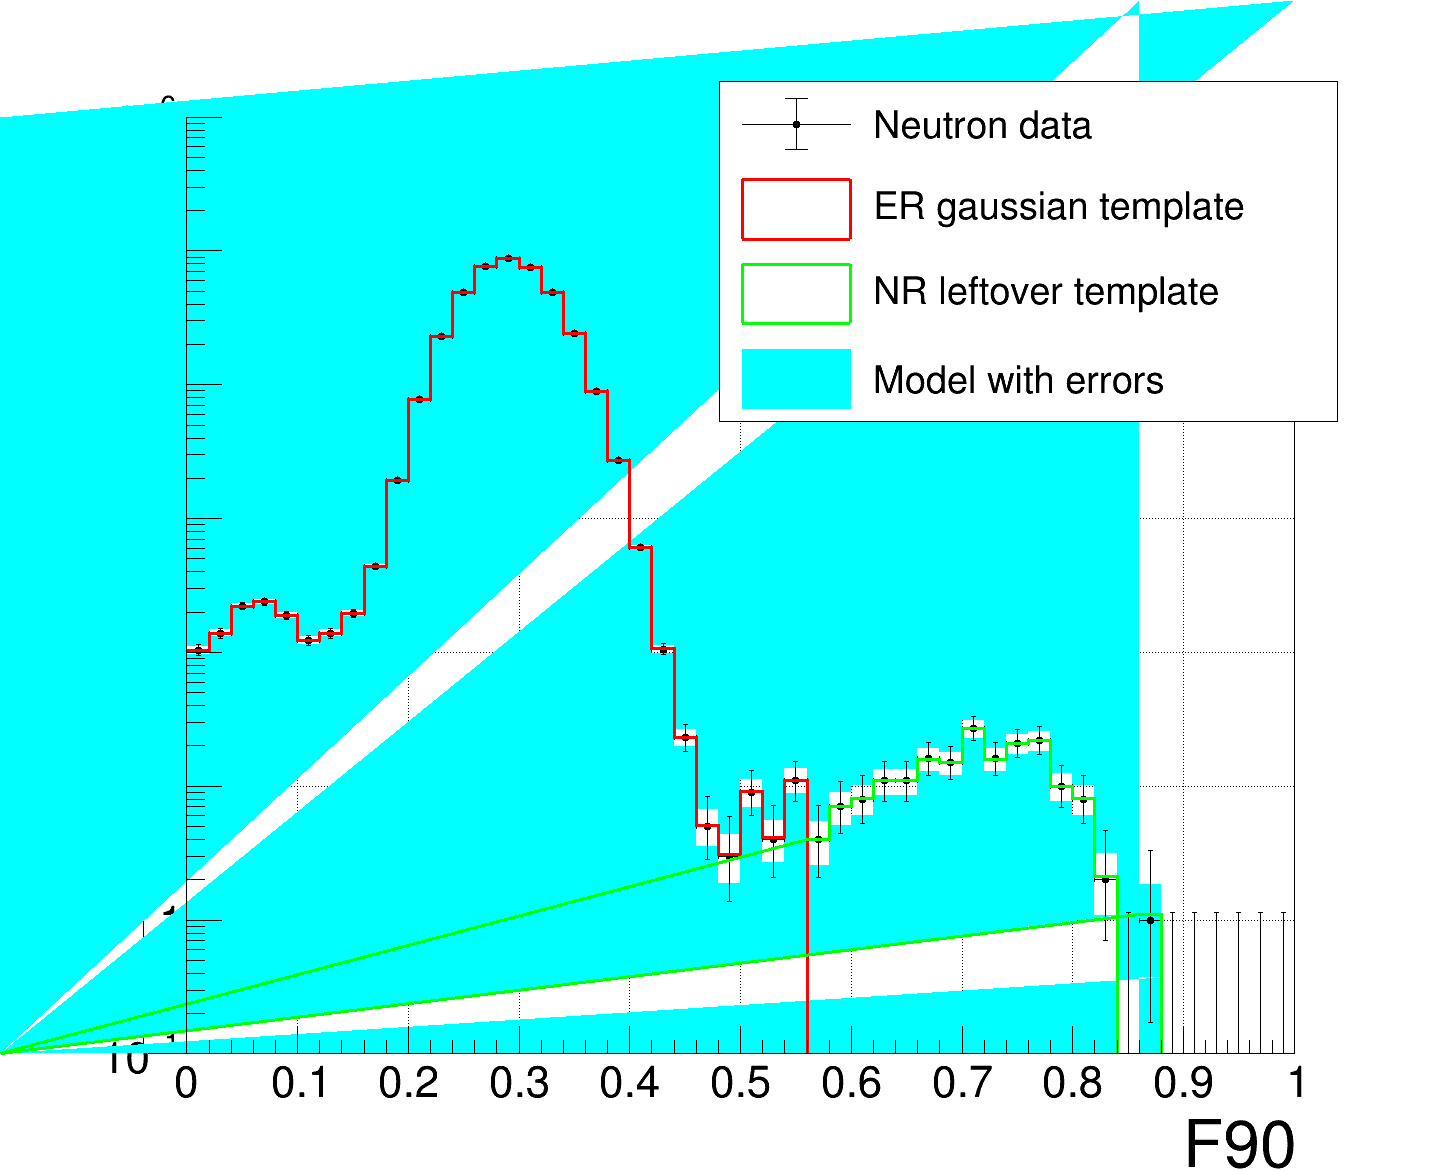 Combined_ER_and_NR_pdf_fit_in_neutron_data_Bin_4